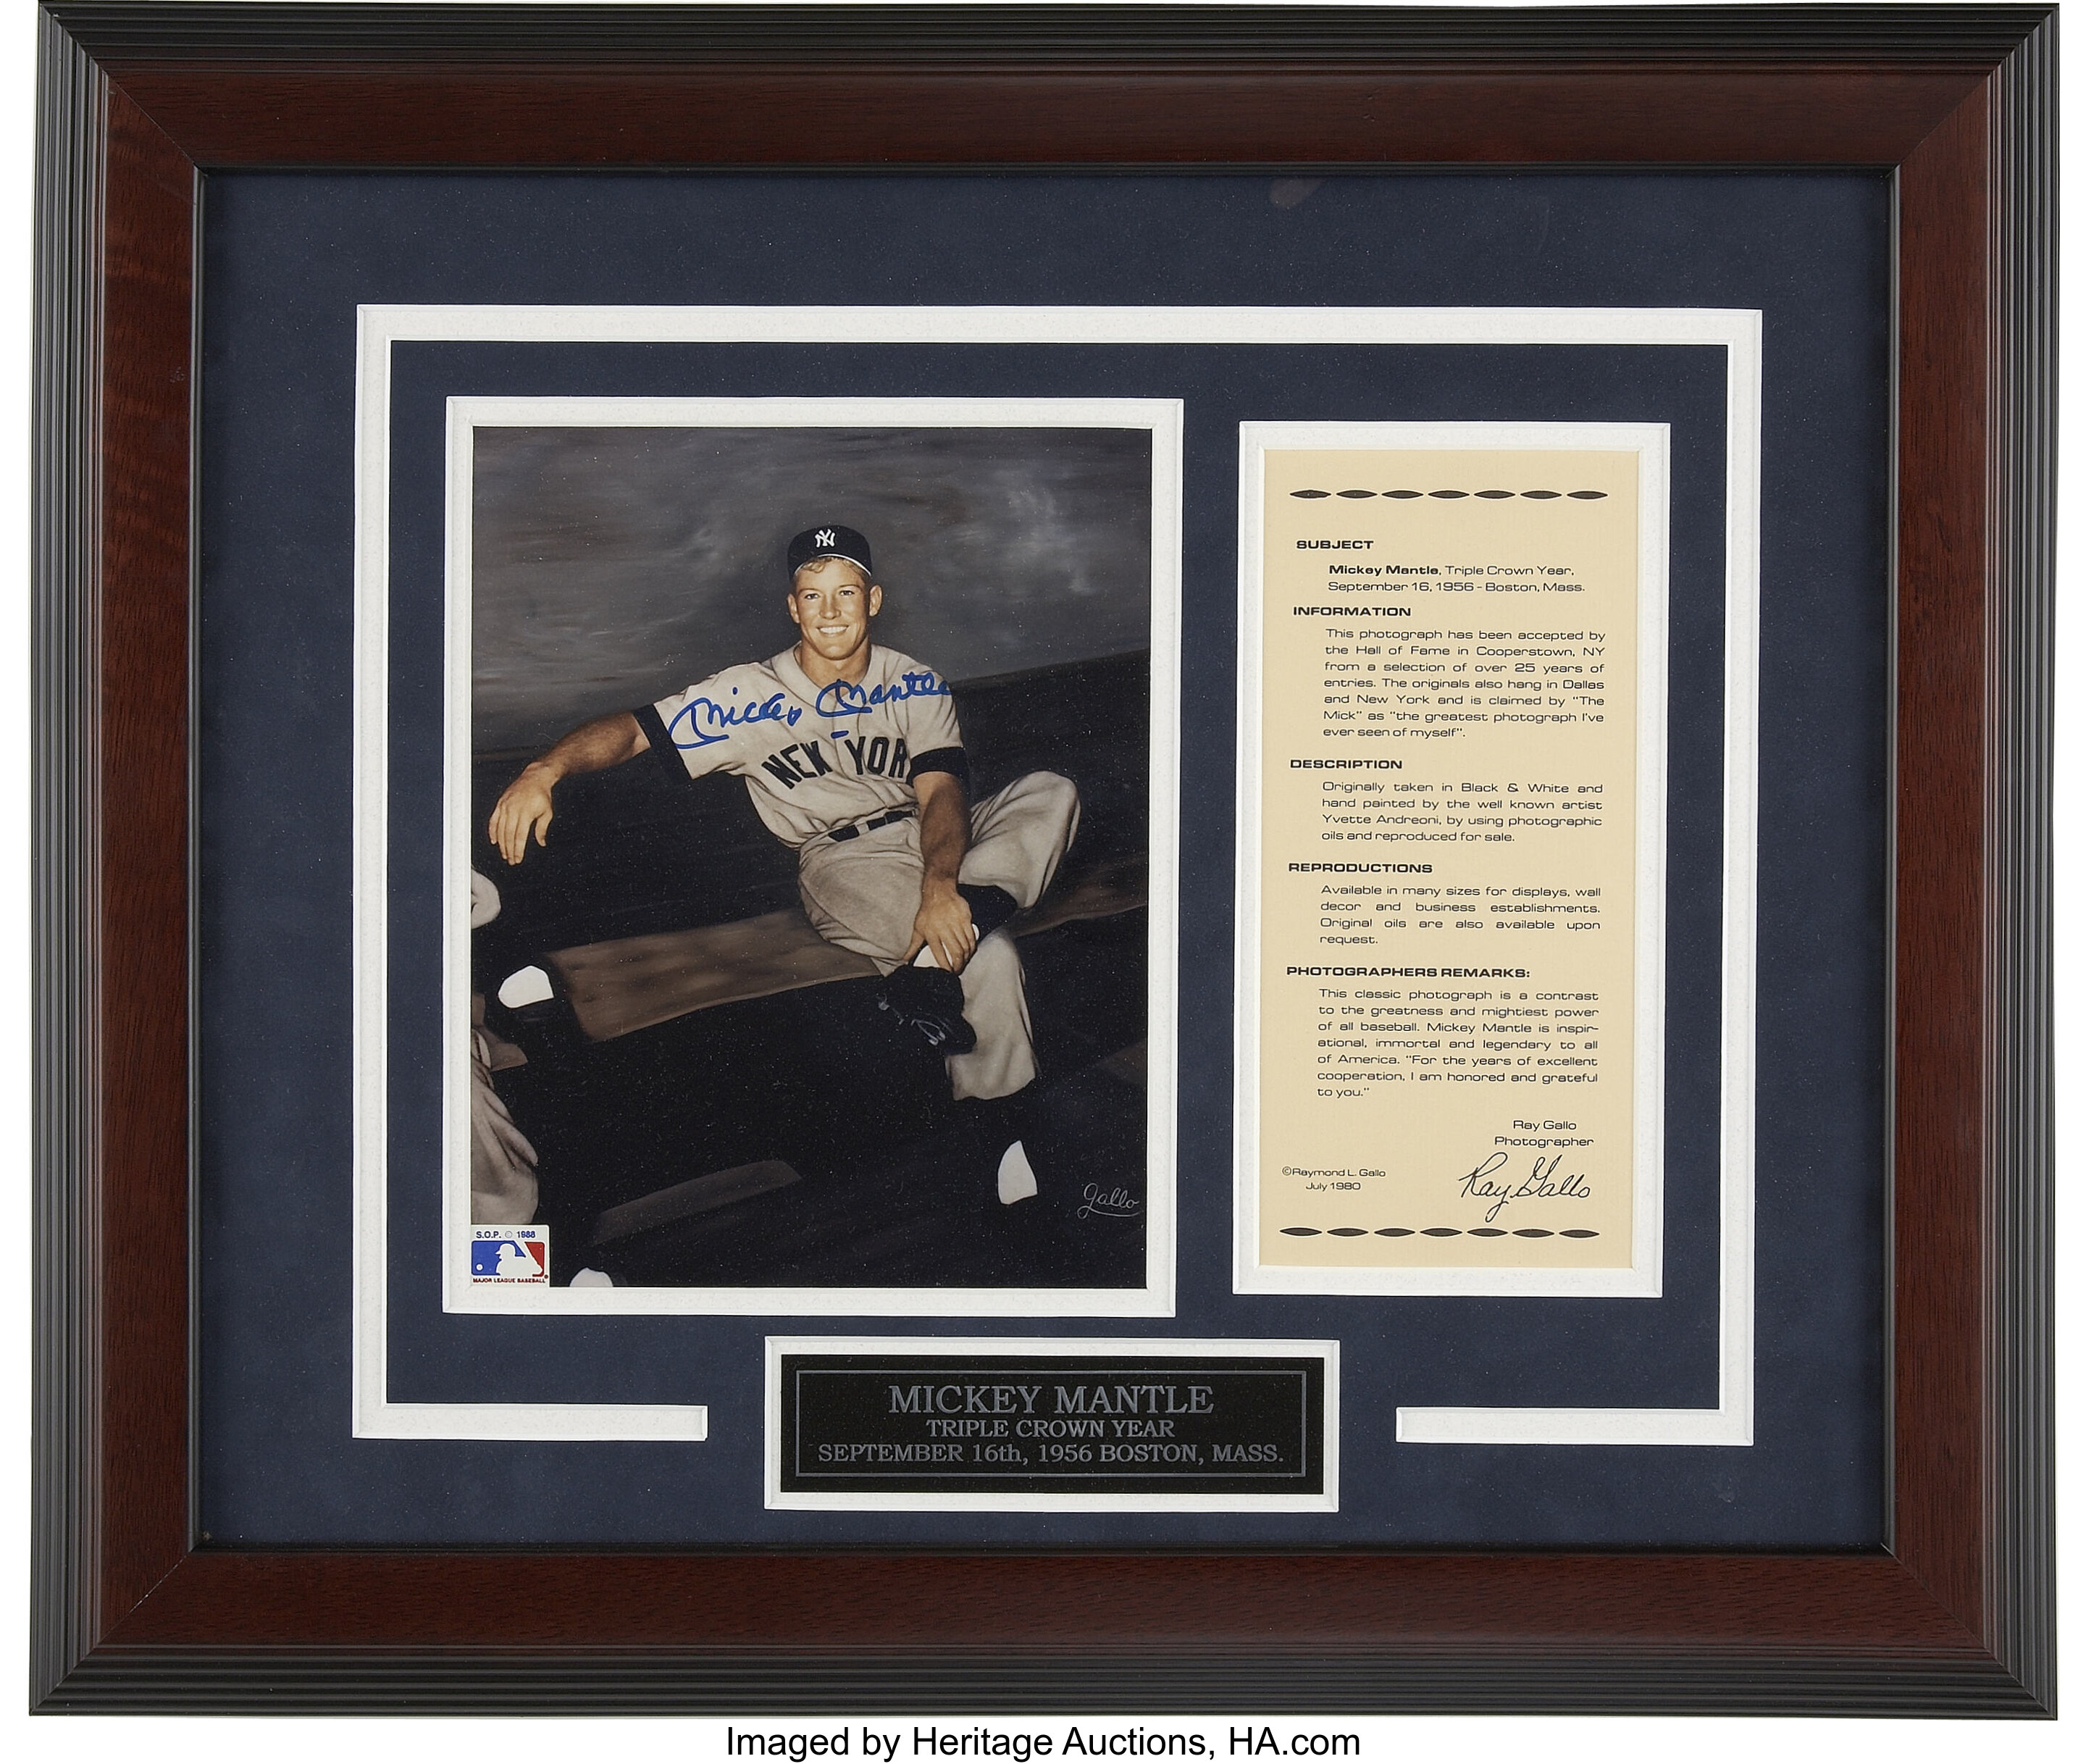 Mickey Mantle Signed Photograph with Matted Jersey In Framed